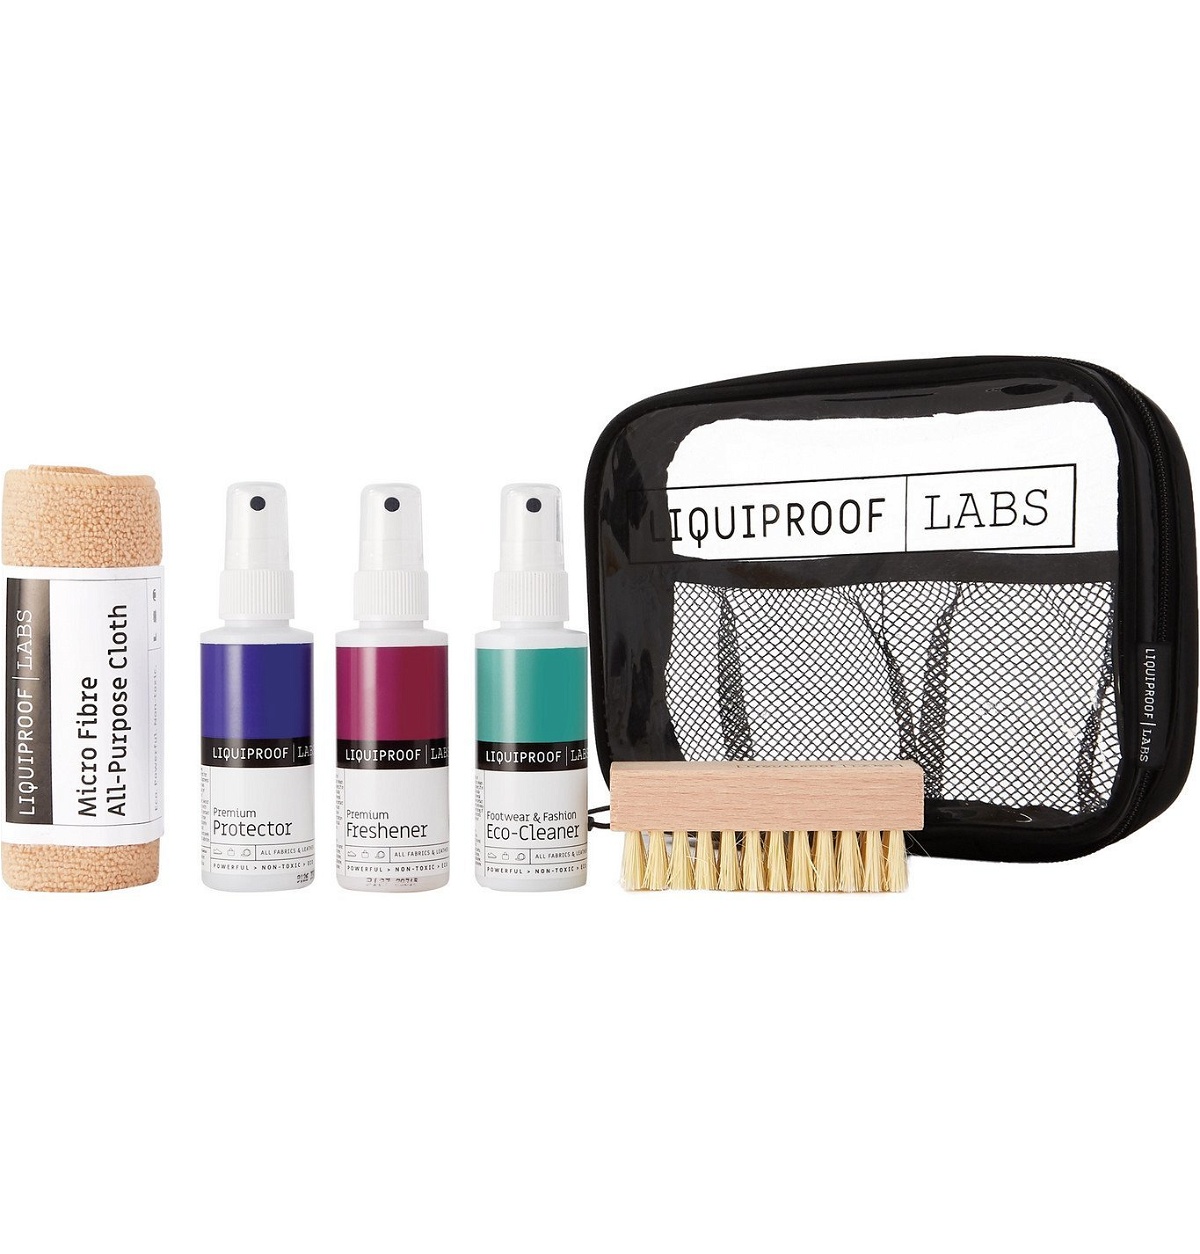 Photo: Liquiproof LABS - Footwear & Fashion Care Travel Kit - Colorless